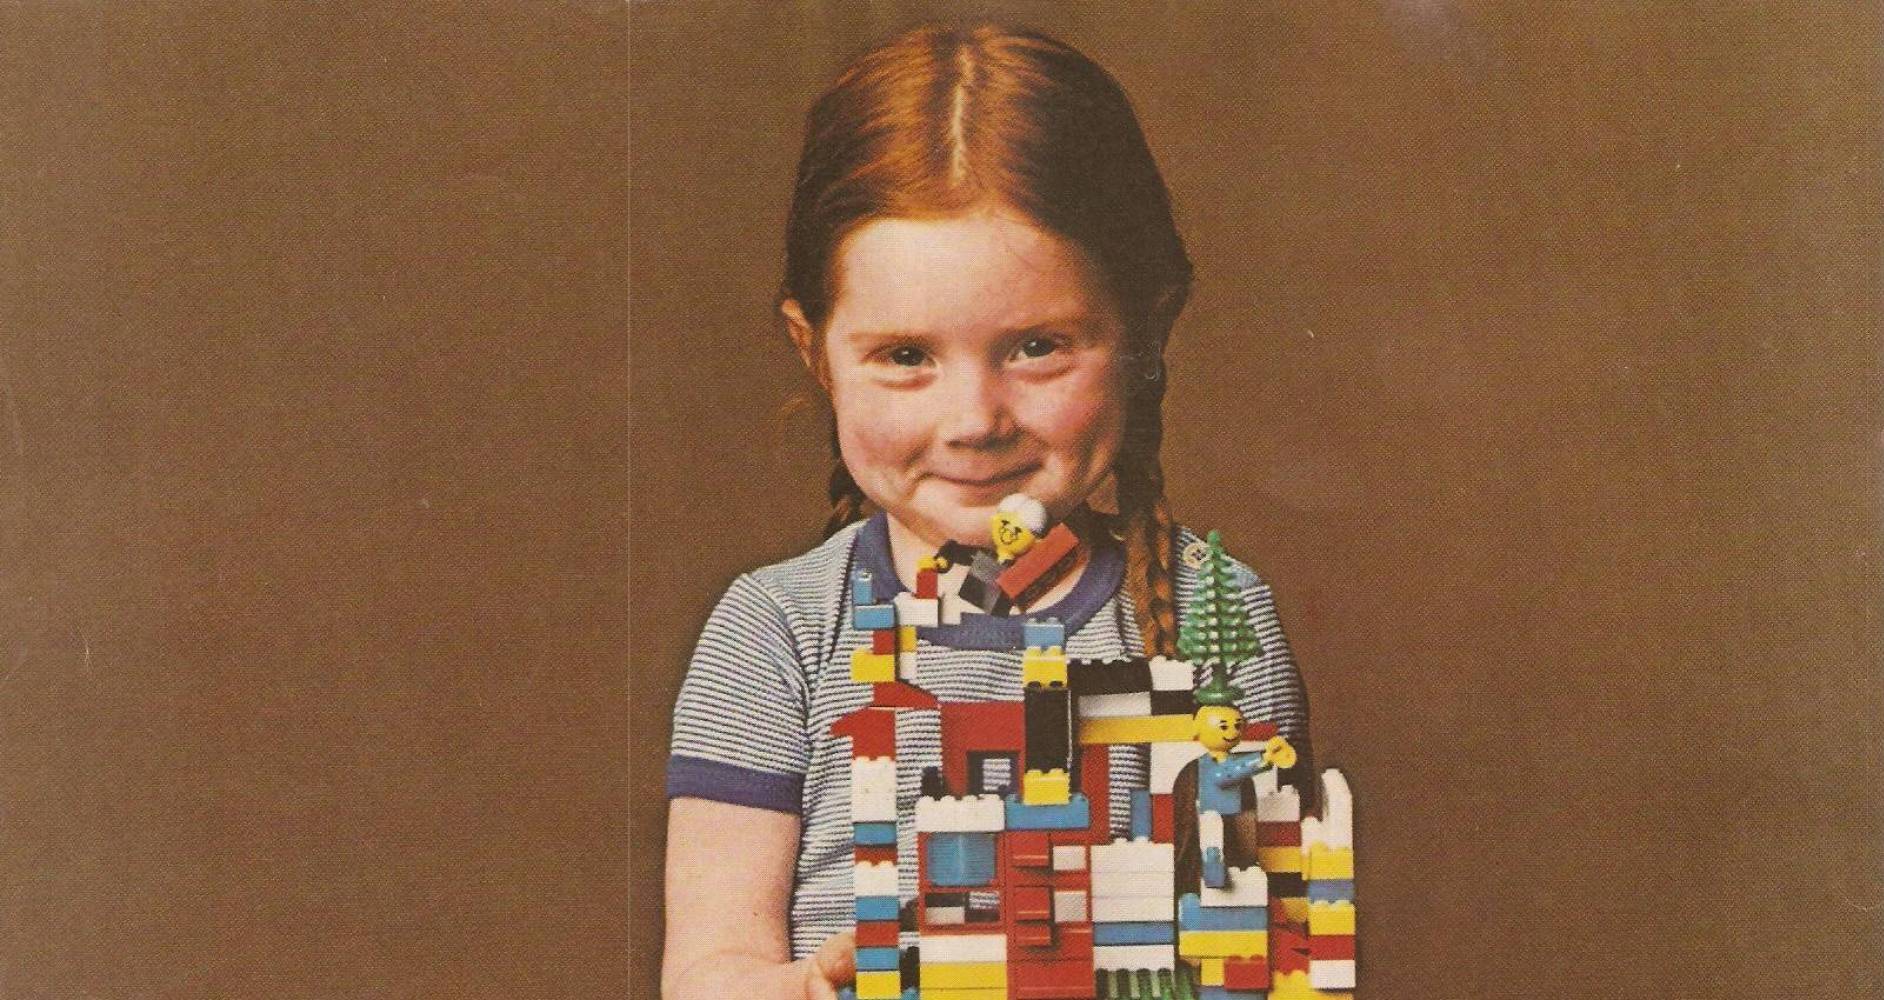 Girl from an 80s Lego commercial,
holding her fantastic creation with a smirk
